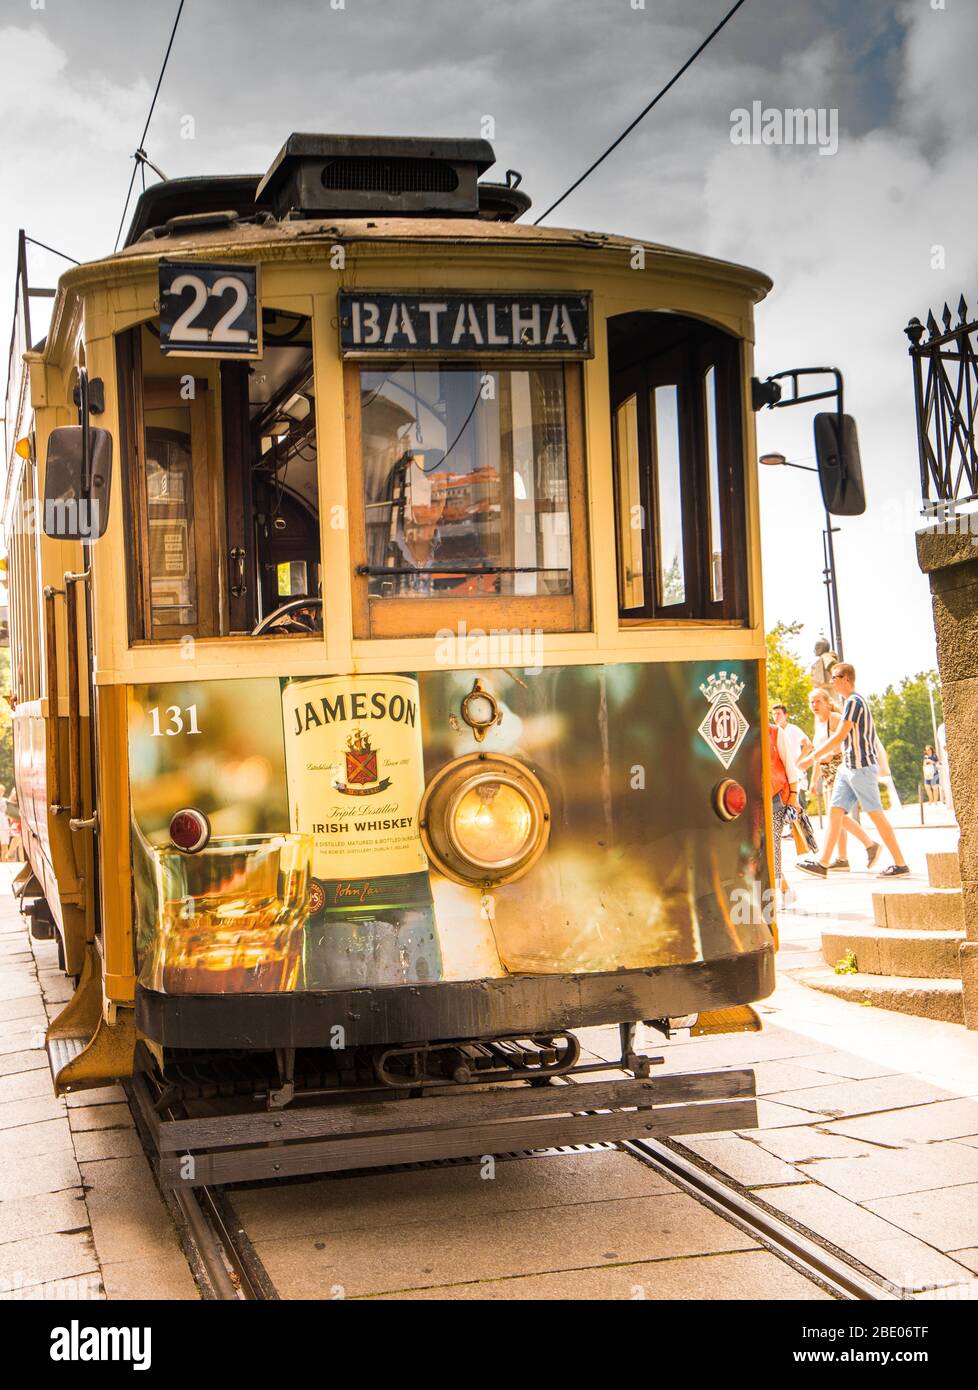 Traditional tram in Porto Portugal with advertisement for Jameson Whiskey on the front Stock Photo